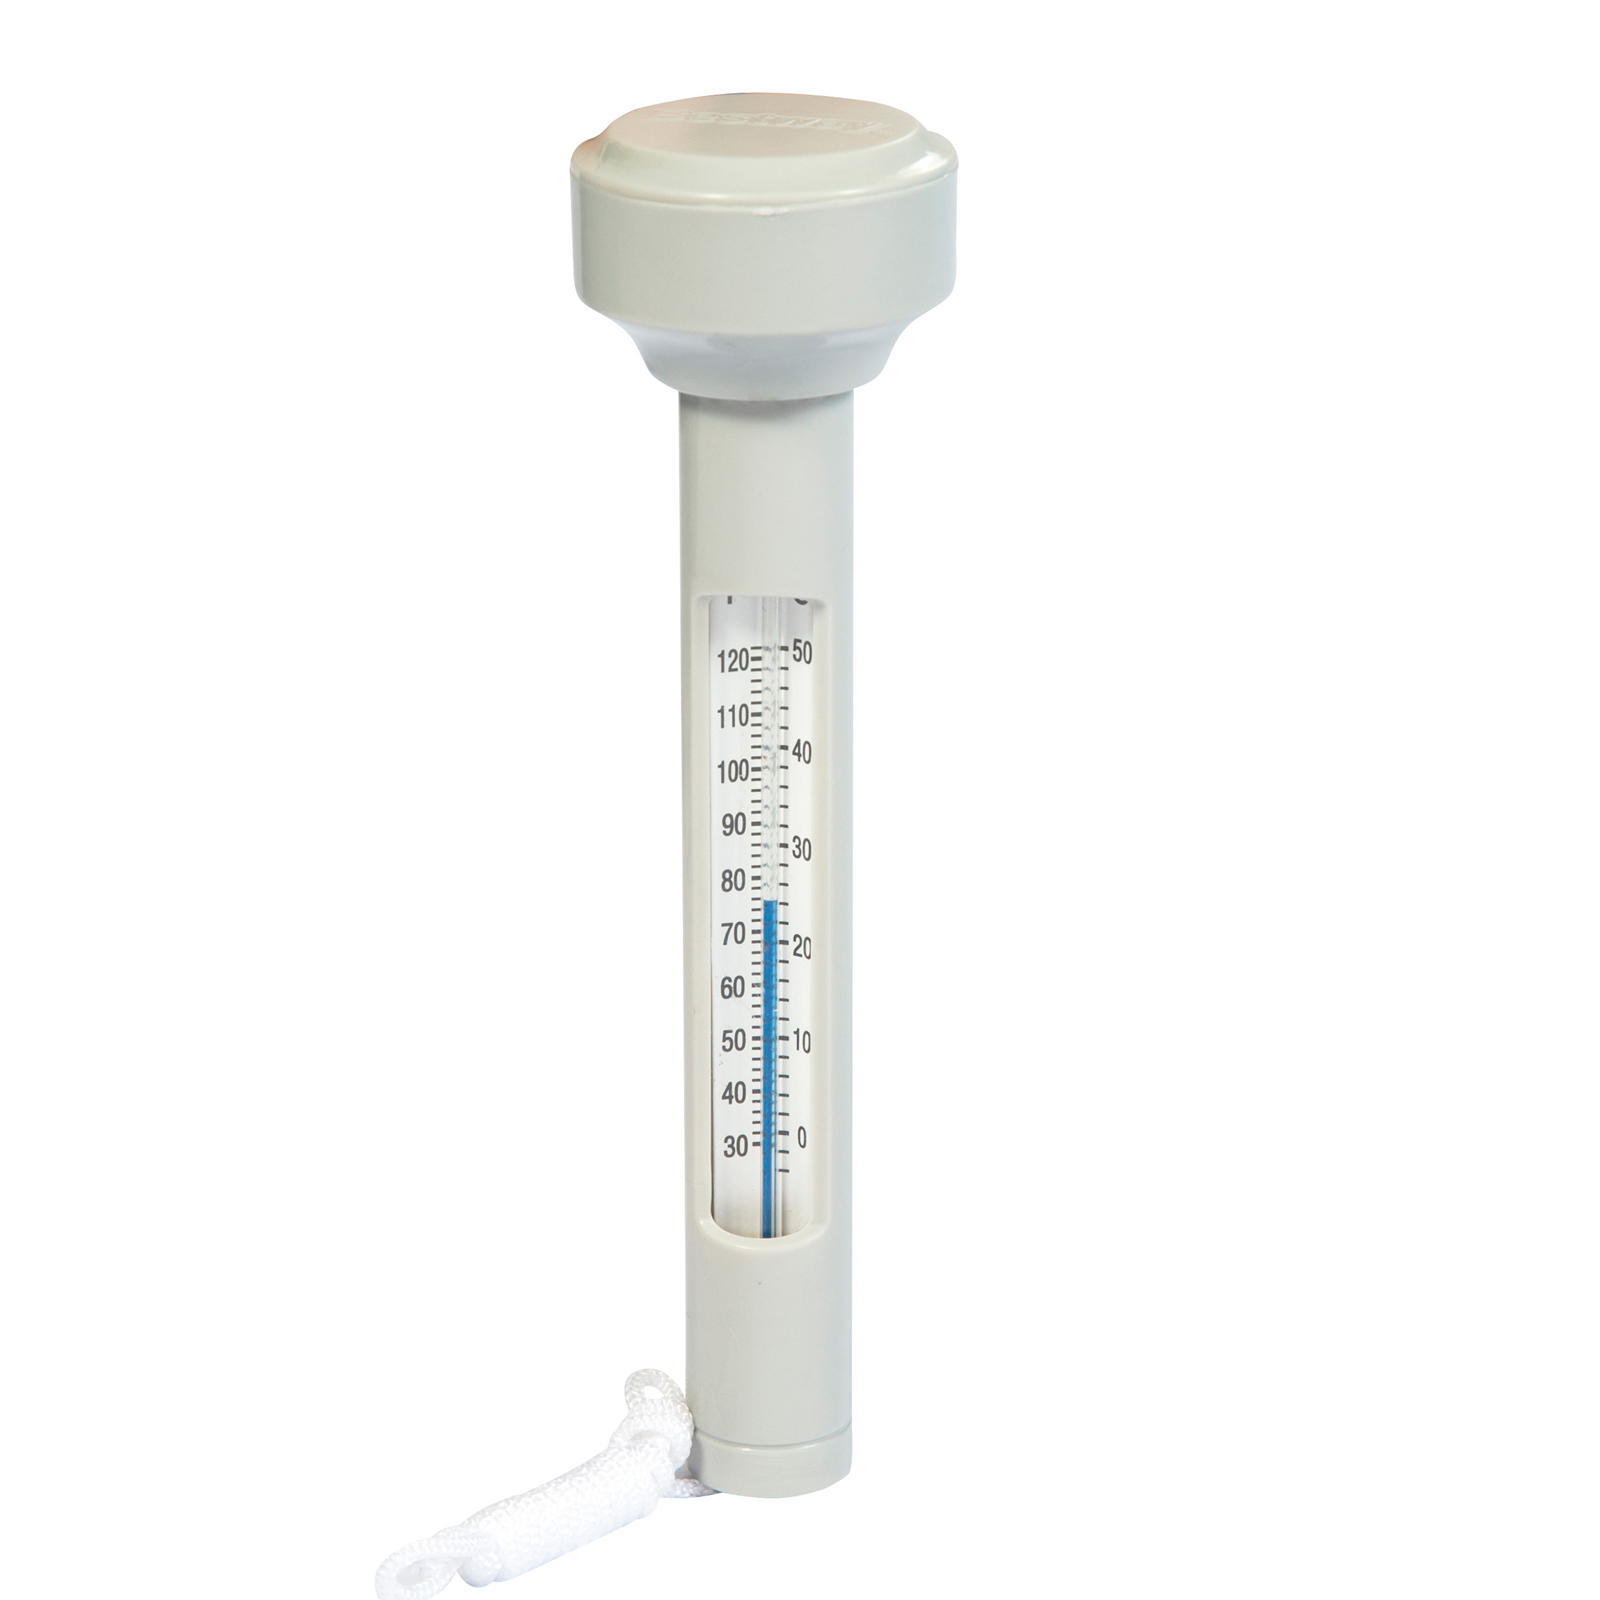 UPC 821808580729 product image for Bestway Flowclear Floating Pool Thermometer | upcitemdb.com